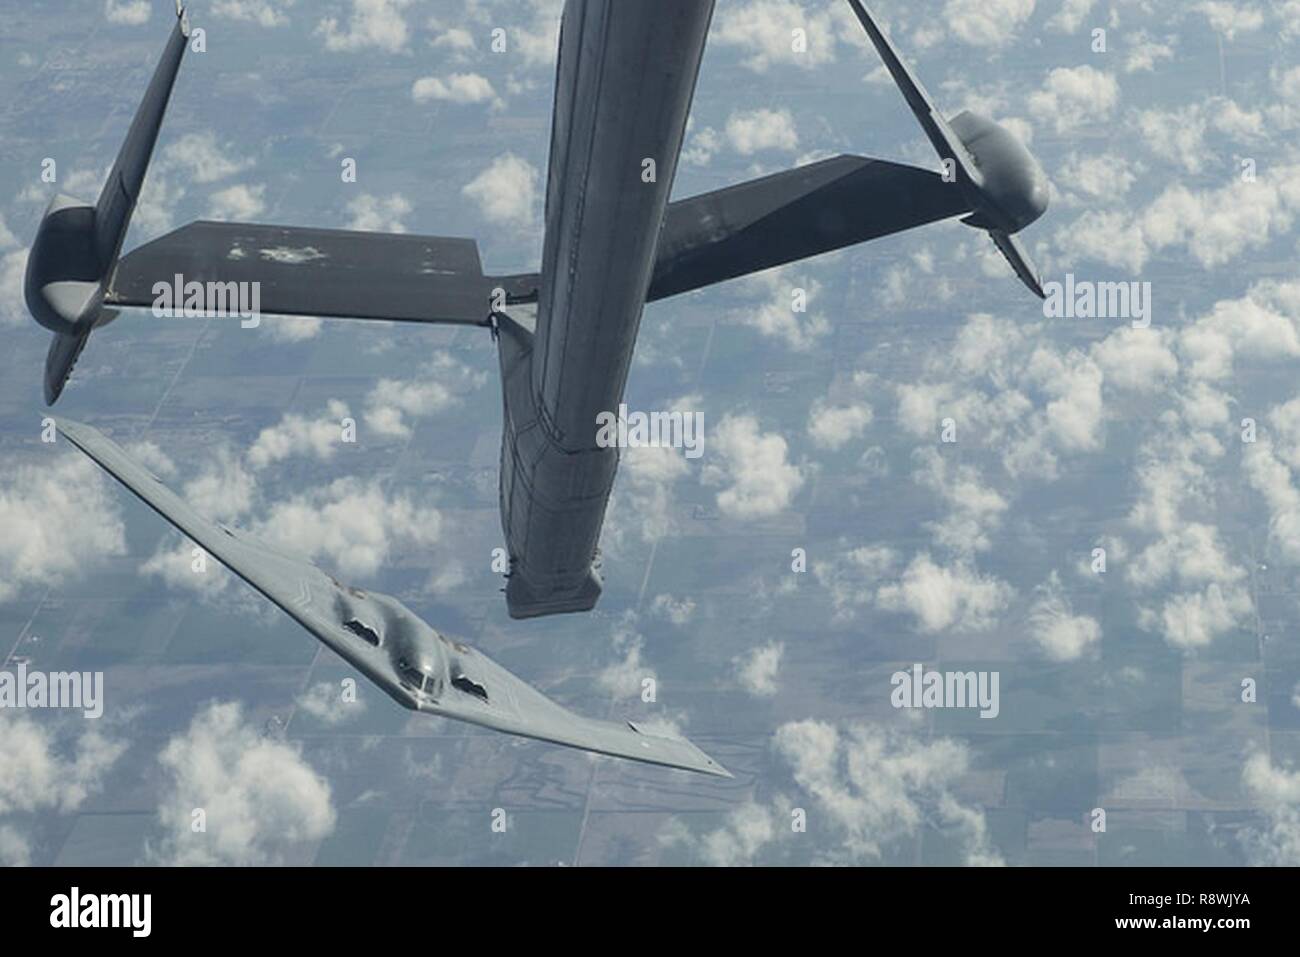 A B-2 Spirit from Whiteman Air Force Base, Mo. backs away and banks left after receiving fuel from a KC-10 Extender from Joint Base McGuire-Dix-Lakehurst, N.J. during a Mobility Exercise held by JB MDL. The Joint Base holds an annual MOBEX in Gulfport, Miss. to practice deploying and operating in a deployed environment. Stock Photo